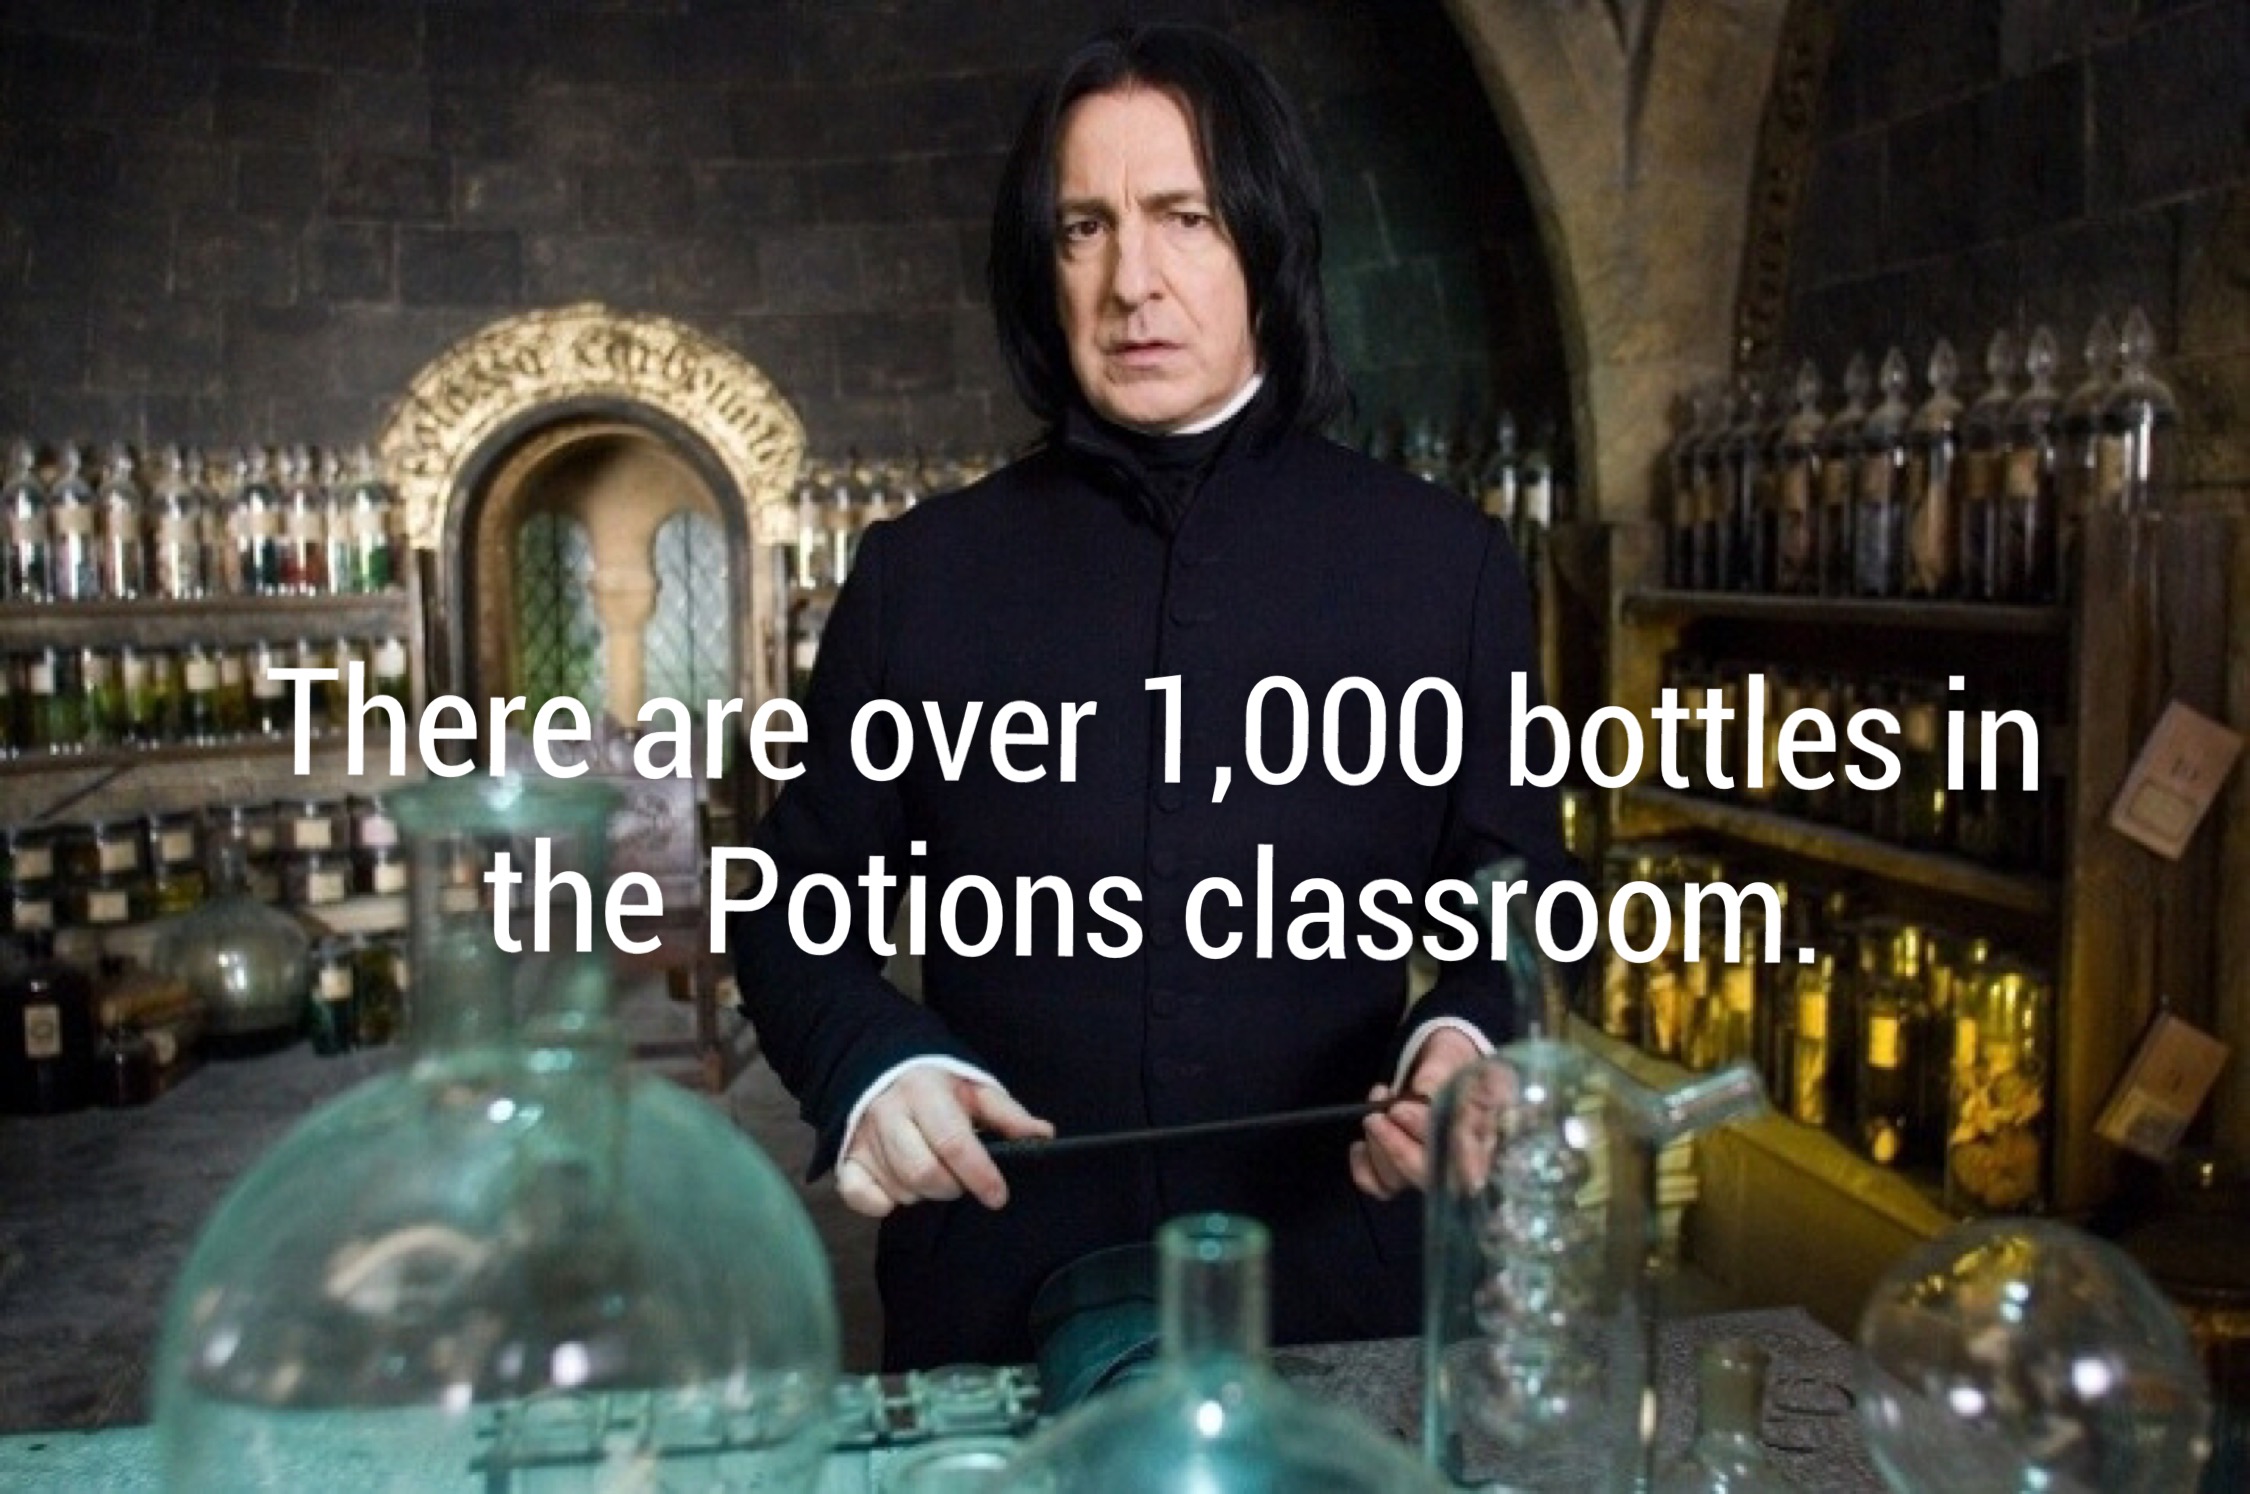 severus snape - There are over 1,000 bottles in the Potions classroom.